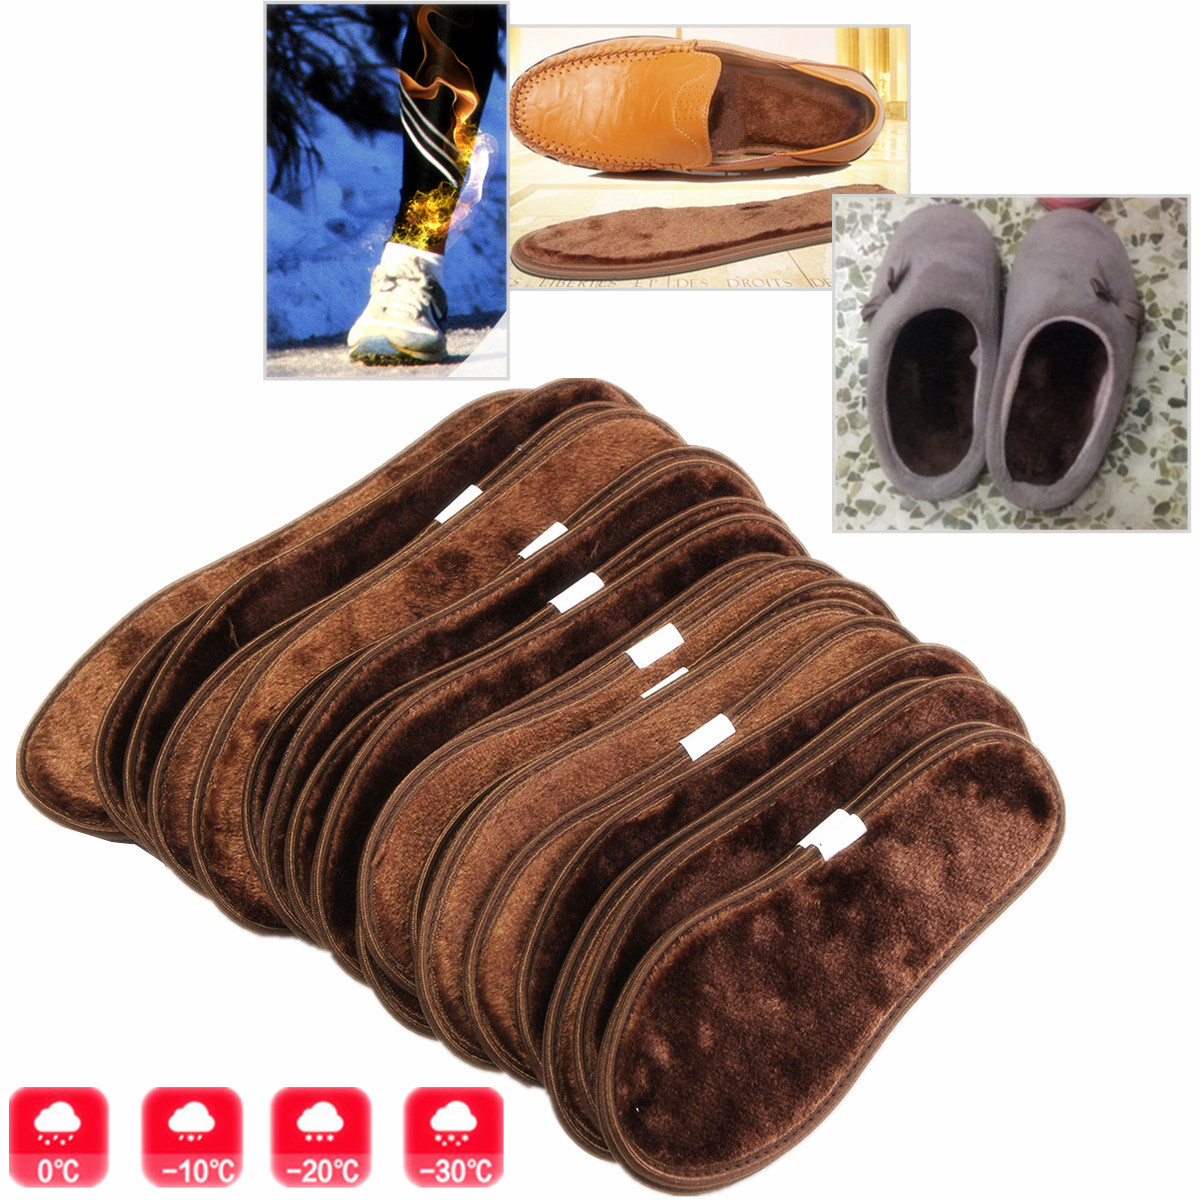 1-Pair-Unisex-Bamboo-Carbon-Deodorant-Insoles-Pads-Inner-Soles-Winter-Warmer-1111705-3